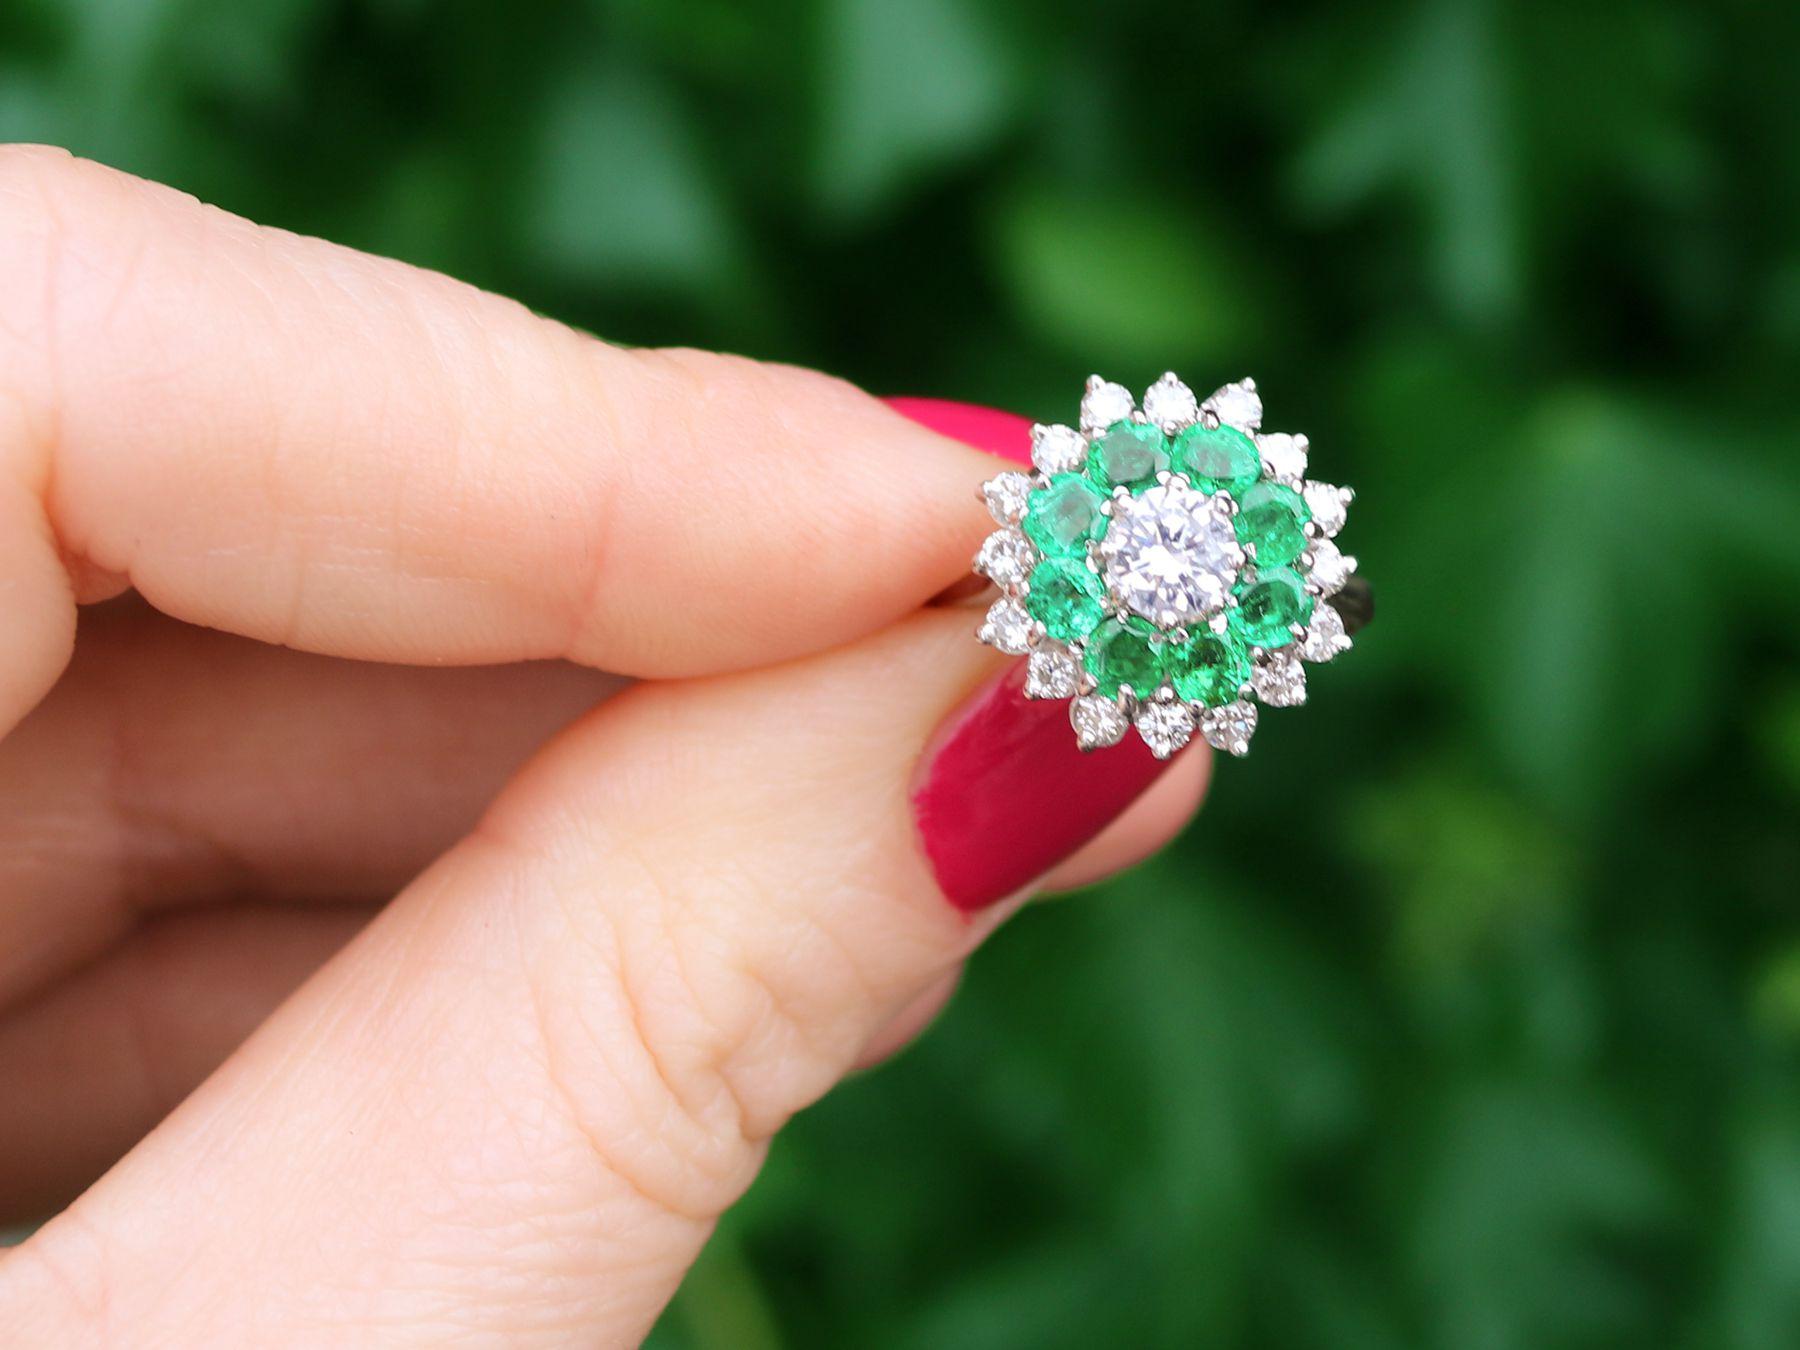 A fine and impressive vintage 0.98 carat emerald and 1.23 carat diamond, 18 karat white gold cocktail ring; part of our diverse range of gemstone jewelry.

This impressive emerald cluster ring has been crafted in 18k white gold.

The substantial